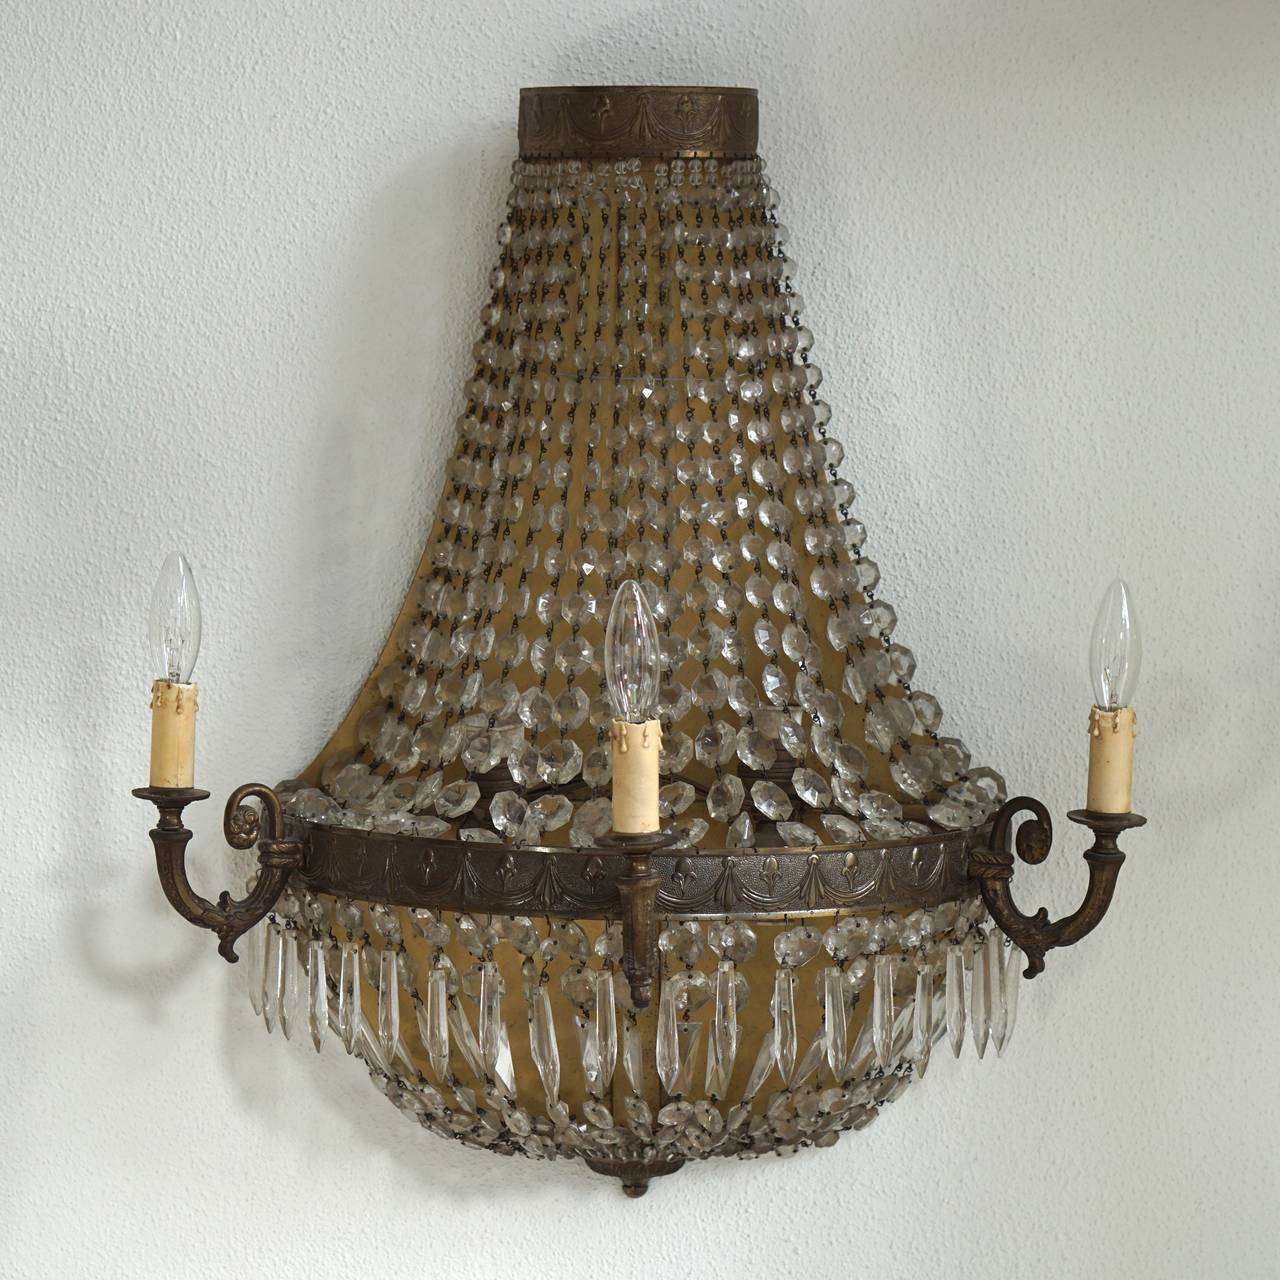 Set of four large French bronze and crystal three-arm wall sconces with decorative bead work, cascading prisms and original crystal bobaches. Originally candle powered and has been electrified, mid-20th century.